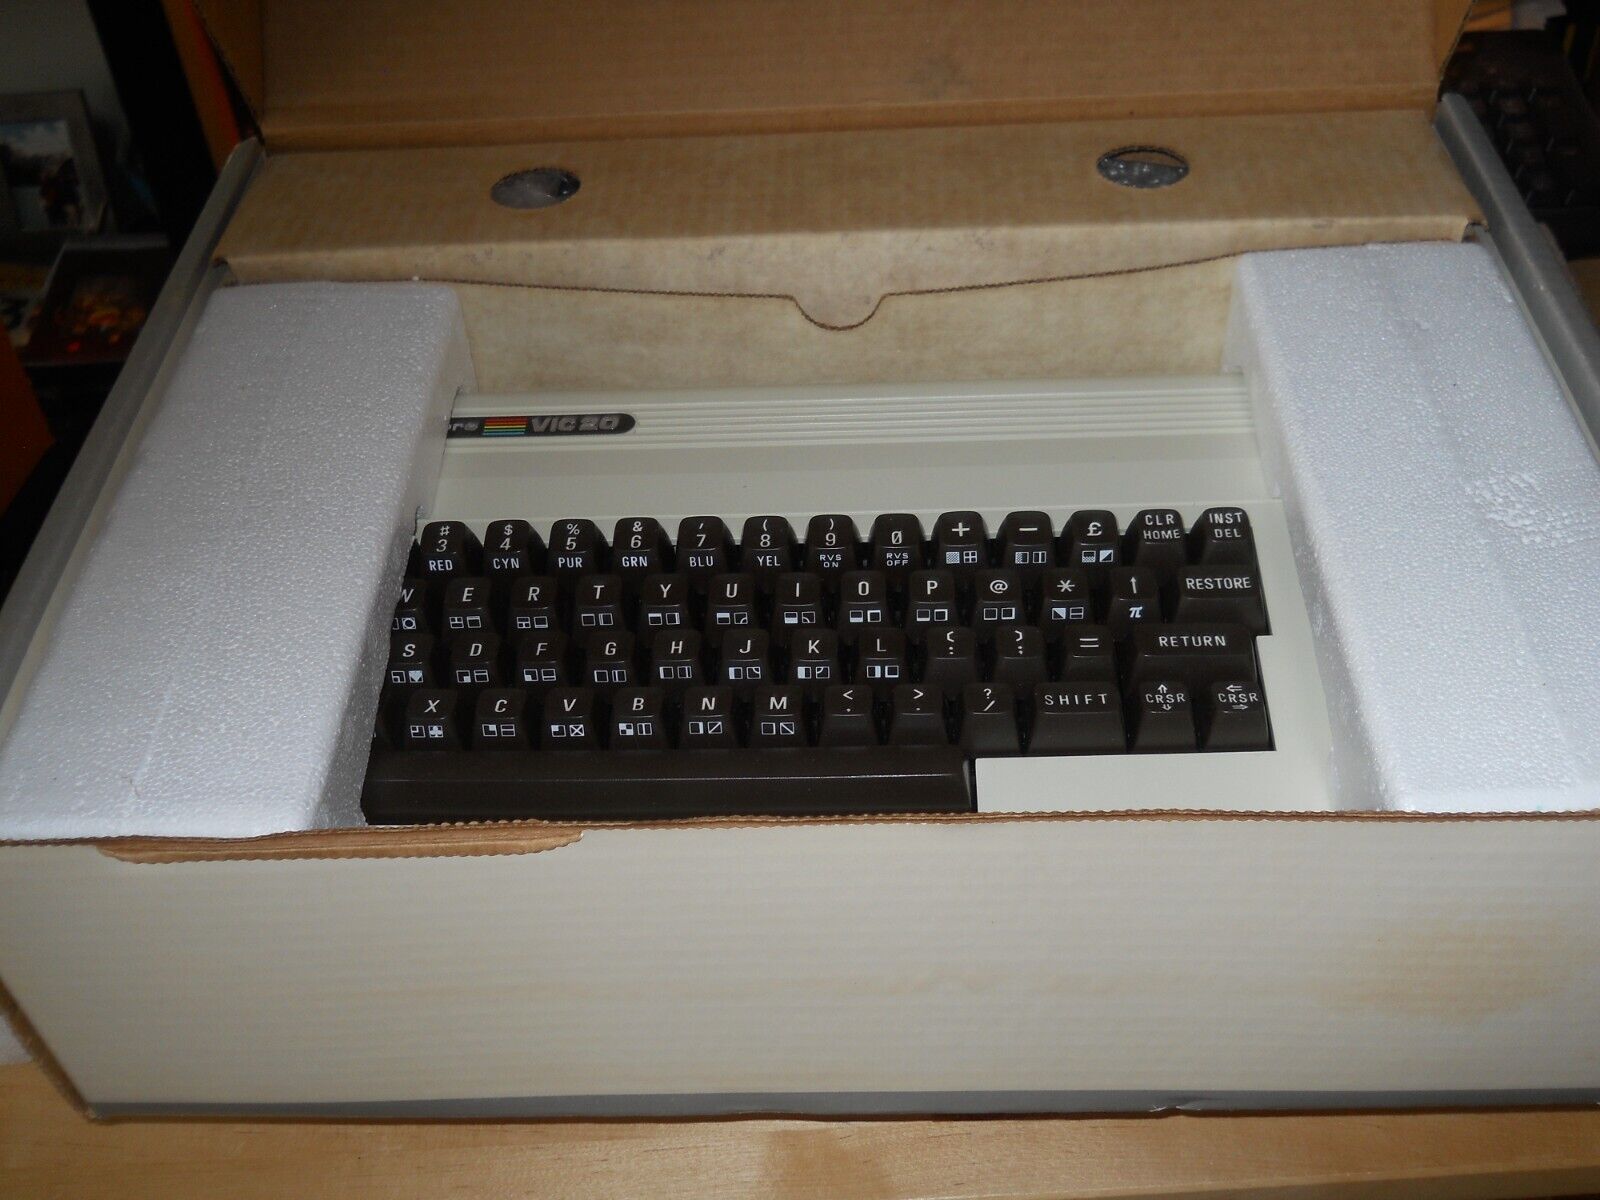 Commodore VIC-20 Personal Computer, New in Box, never used.